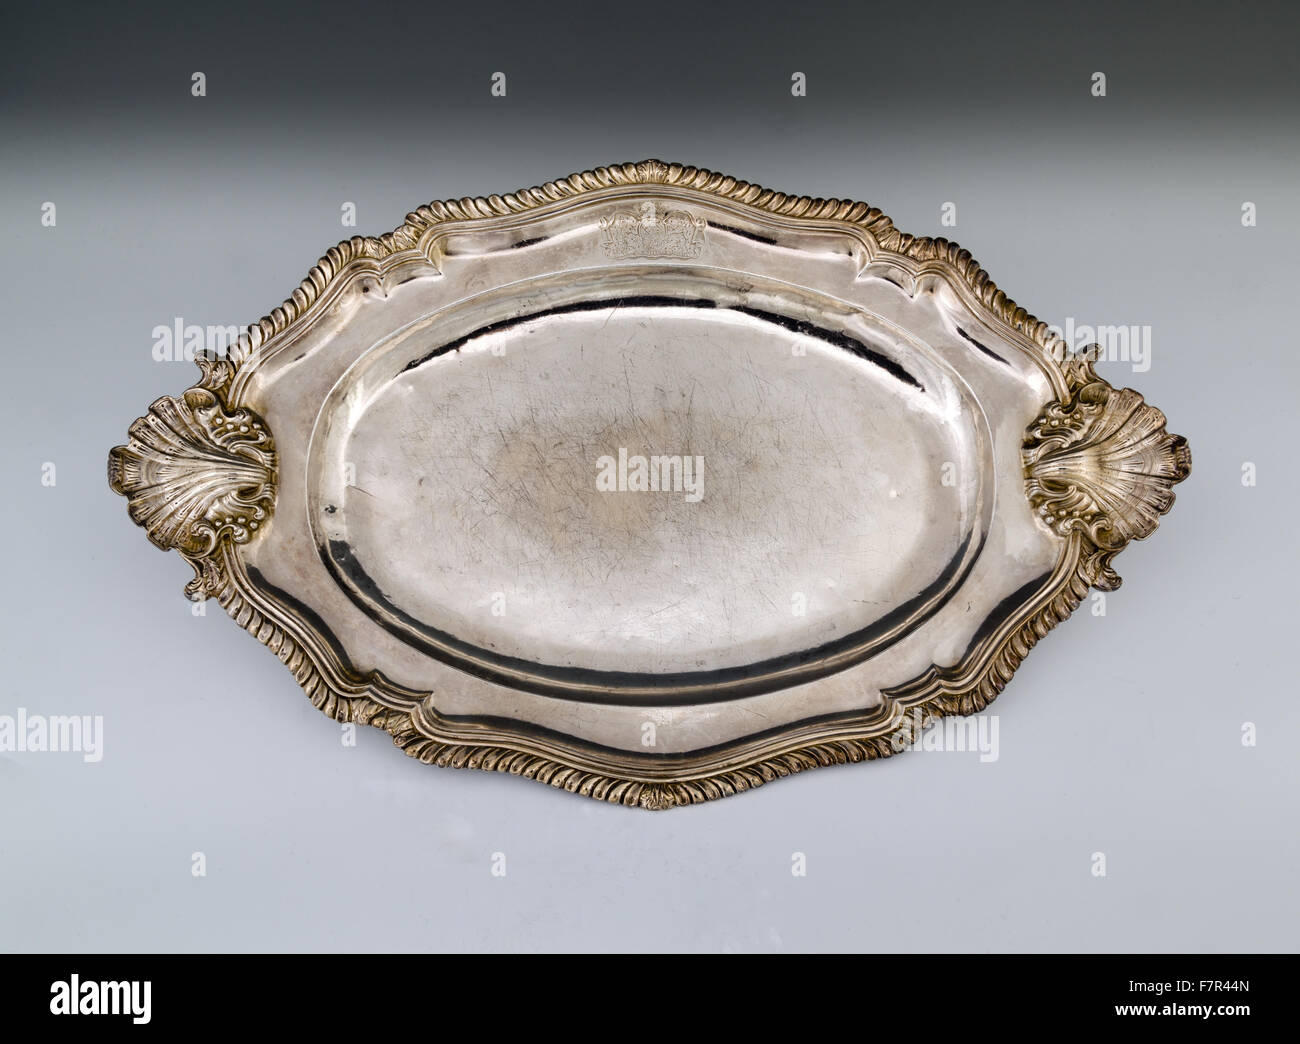 Oval meat dish, probably Frederick Kandler, c.1751, silver at Ickworth, Suffolk. Length 14 ¾ inches. National Trust Inventory number 852095.8. Stock Photo